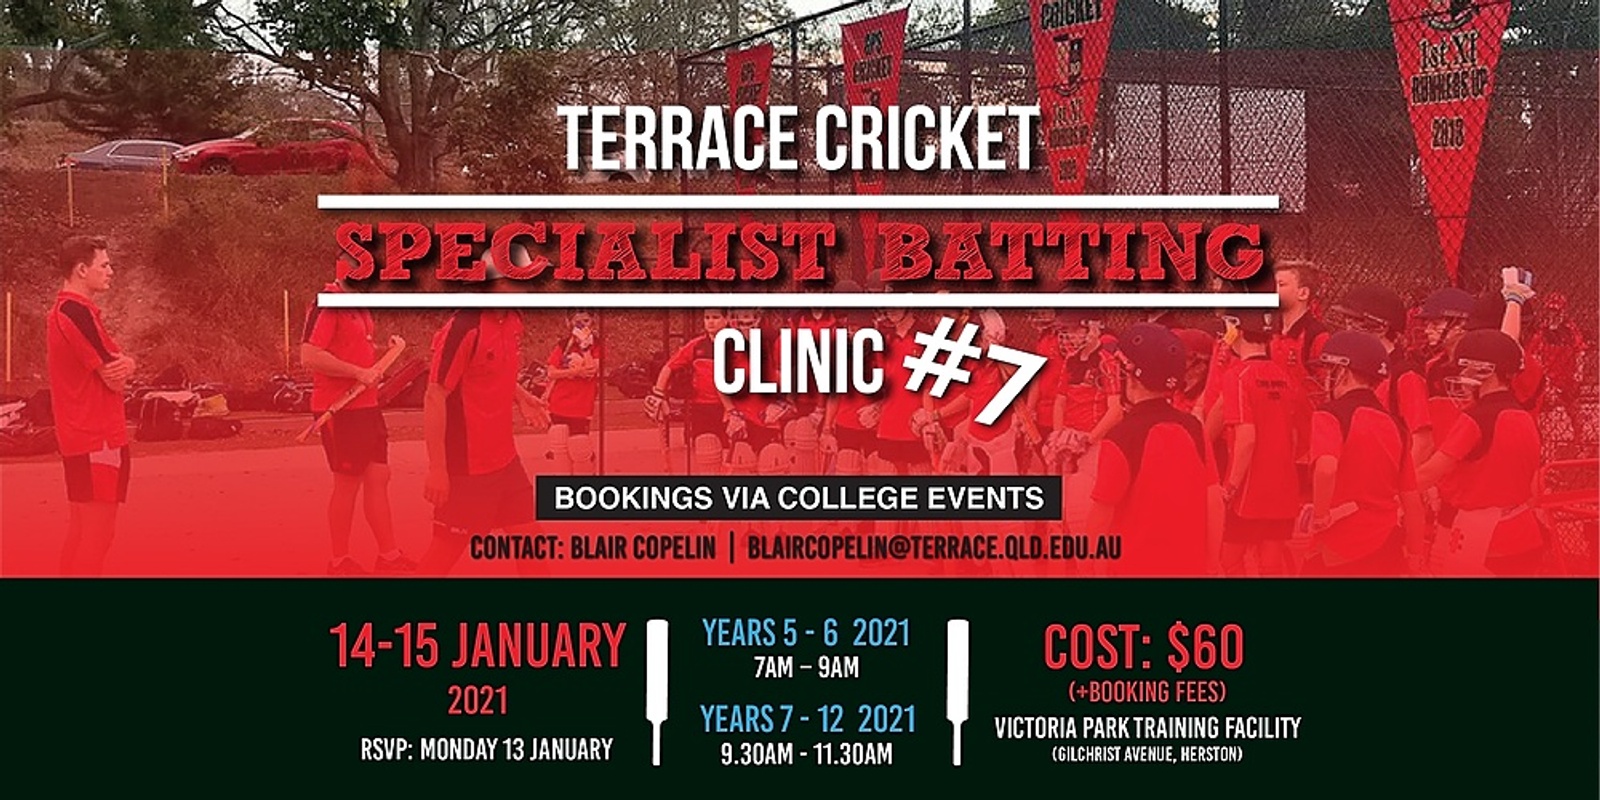 Banner image for Terrace Cricket Specialist Batting Clinic #7